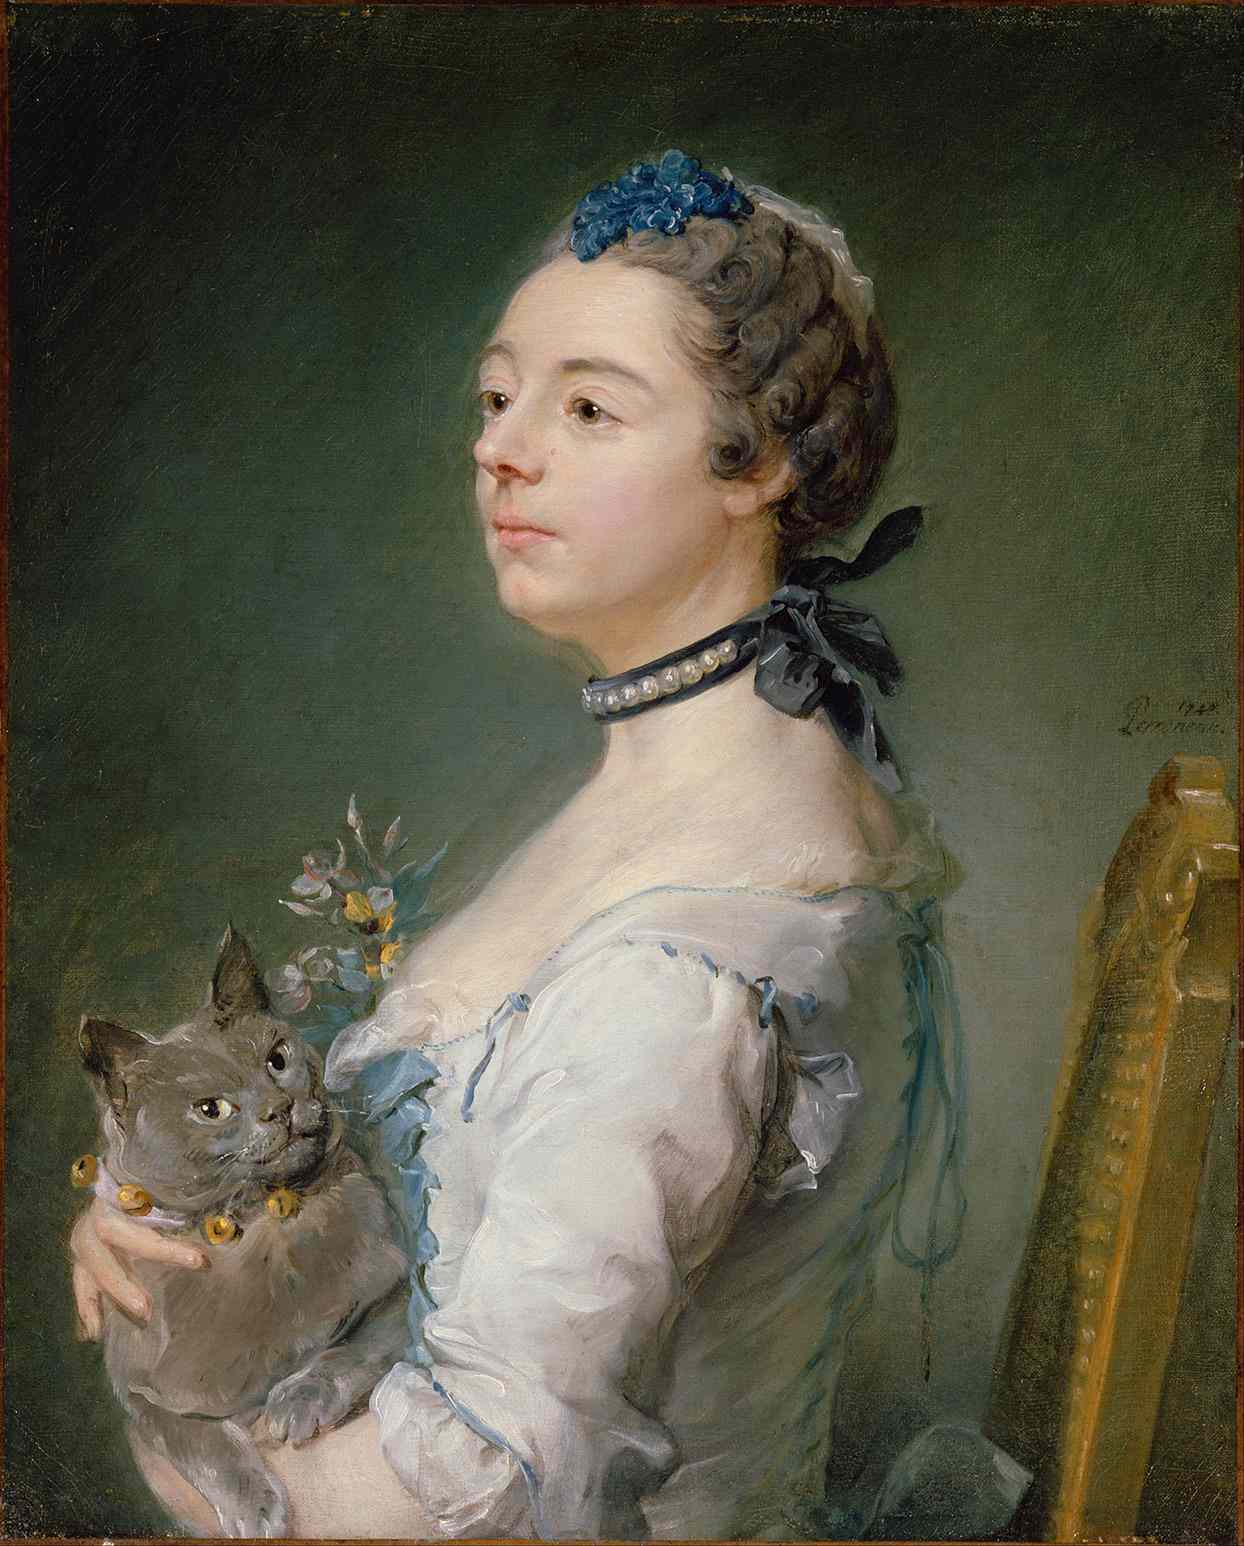 1747 painting with woman holding Chartreux